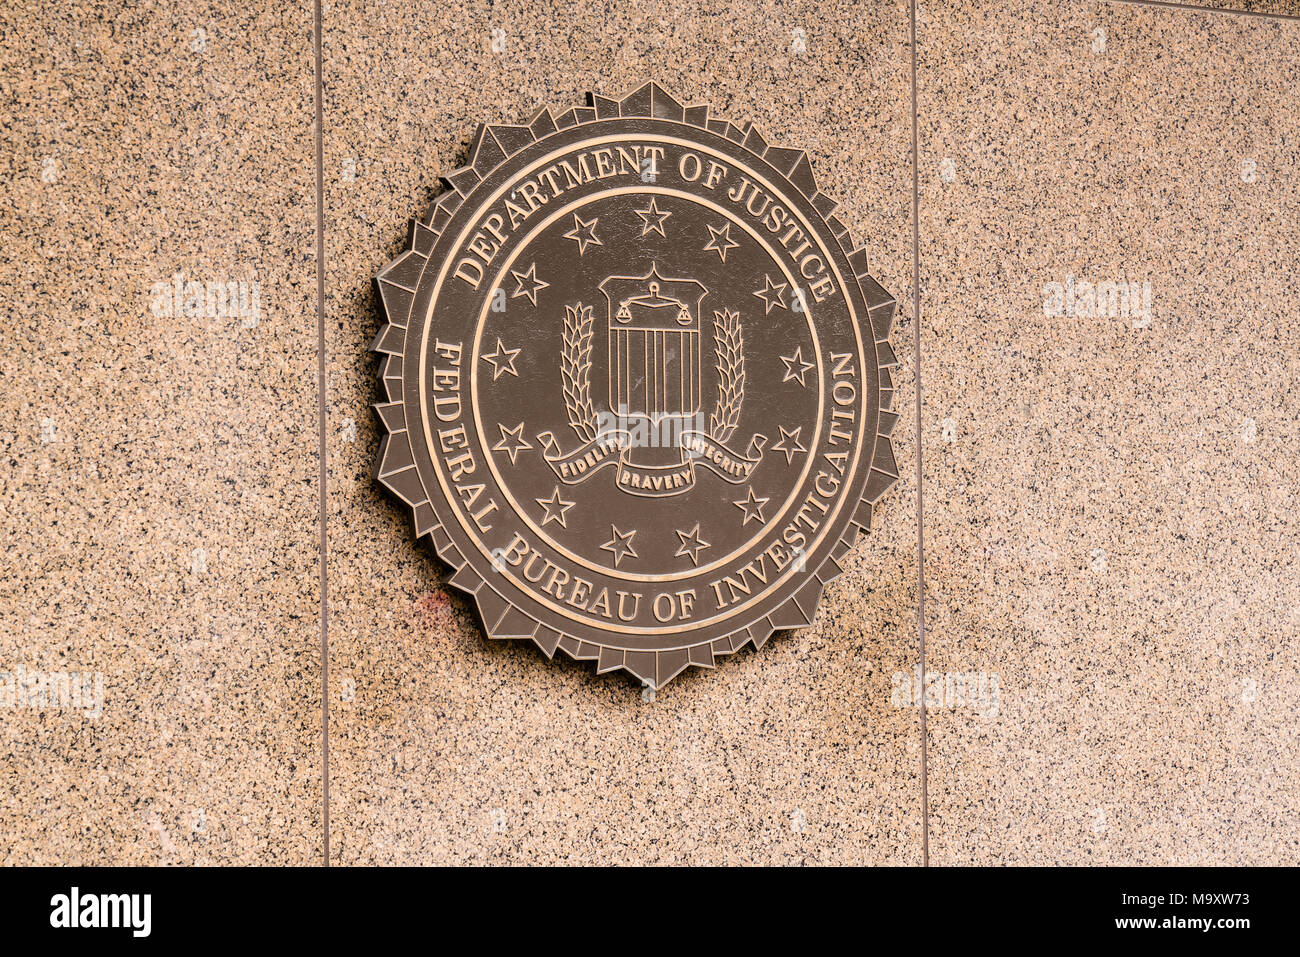 WASHINGTON, DC - MARCH 14, 2018: Seal of the Federal Bureau of Investigation on the J. Edgar Hoover FBI Building in Washington, DC Stock Photo